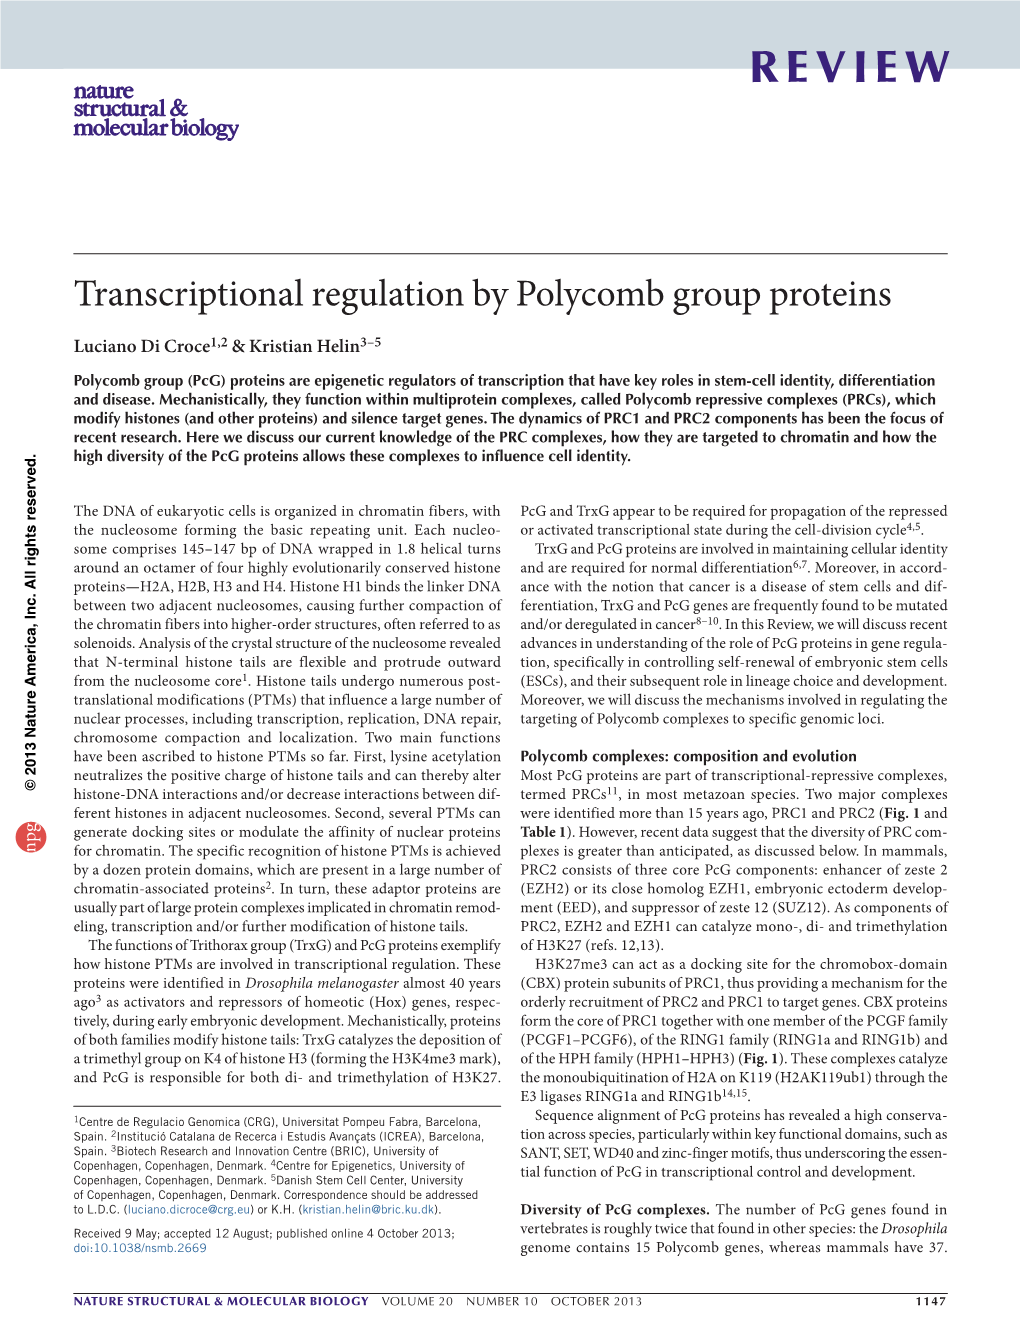 Transcriptional Regulation by Polycomb Group Proteins